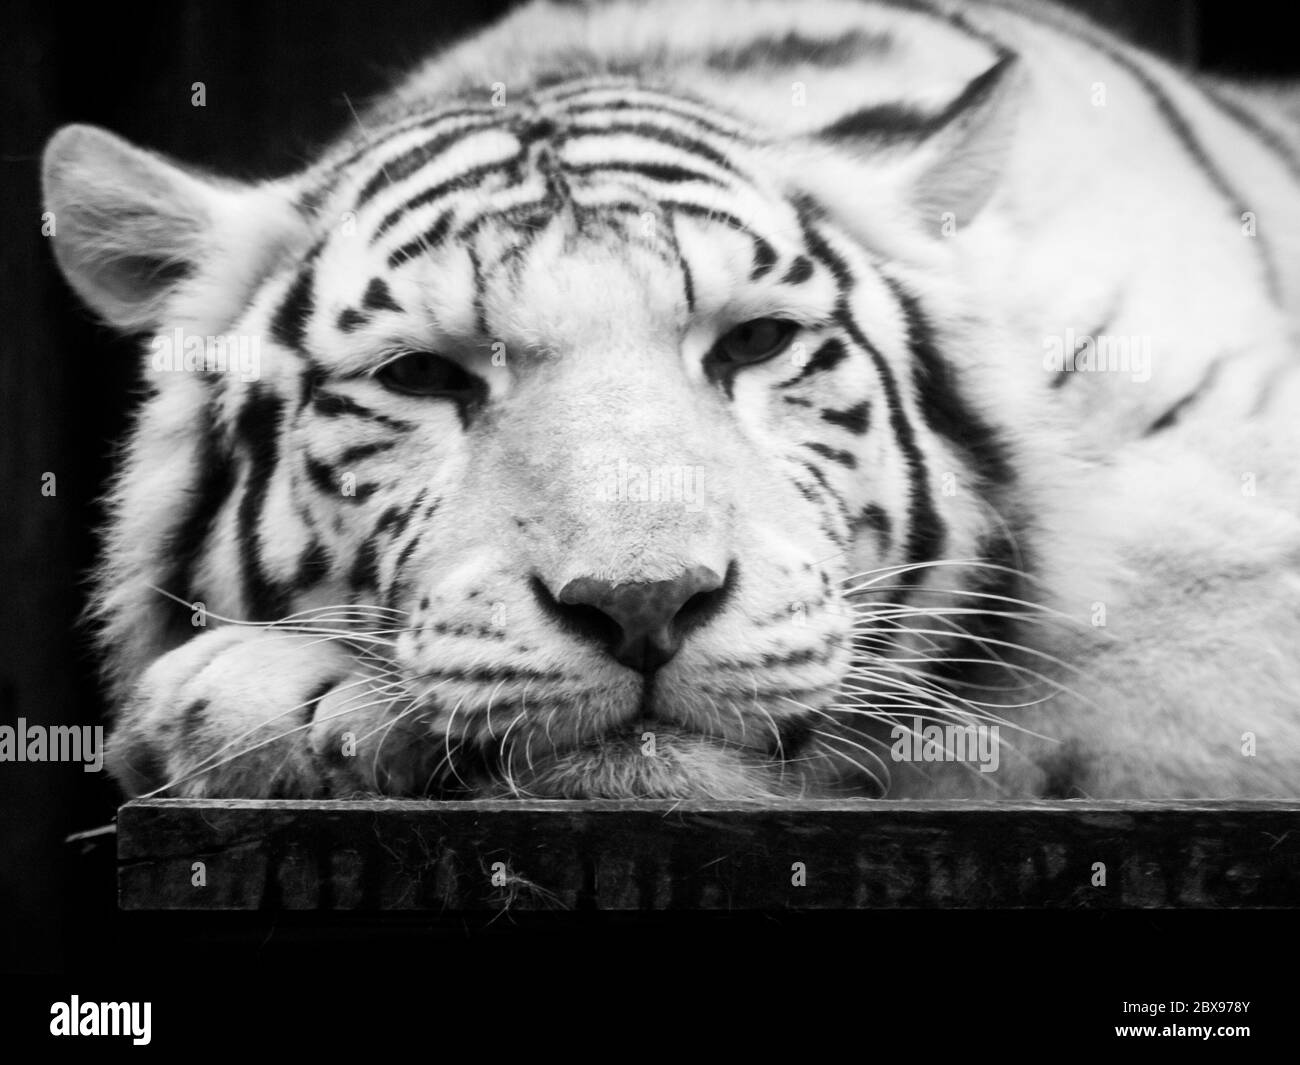 Cute and lazy white tiger lying on the desk on its paw. Wild animal portrait. Black and white image. Stock Photo